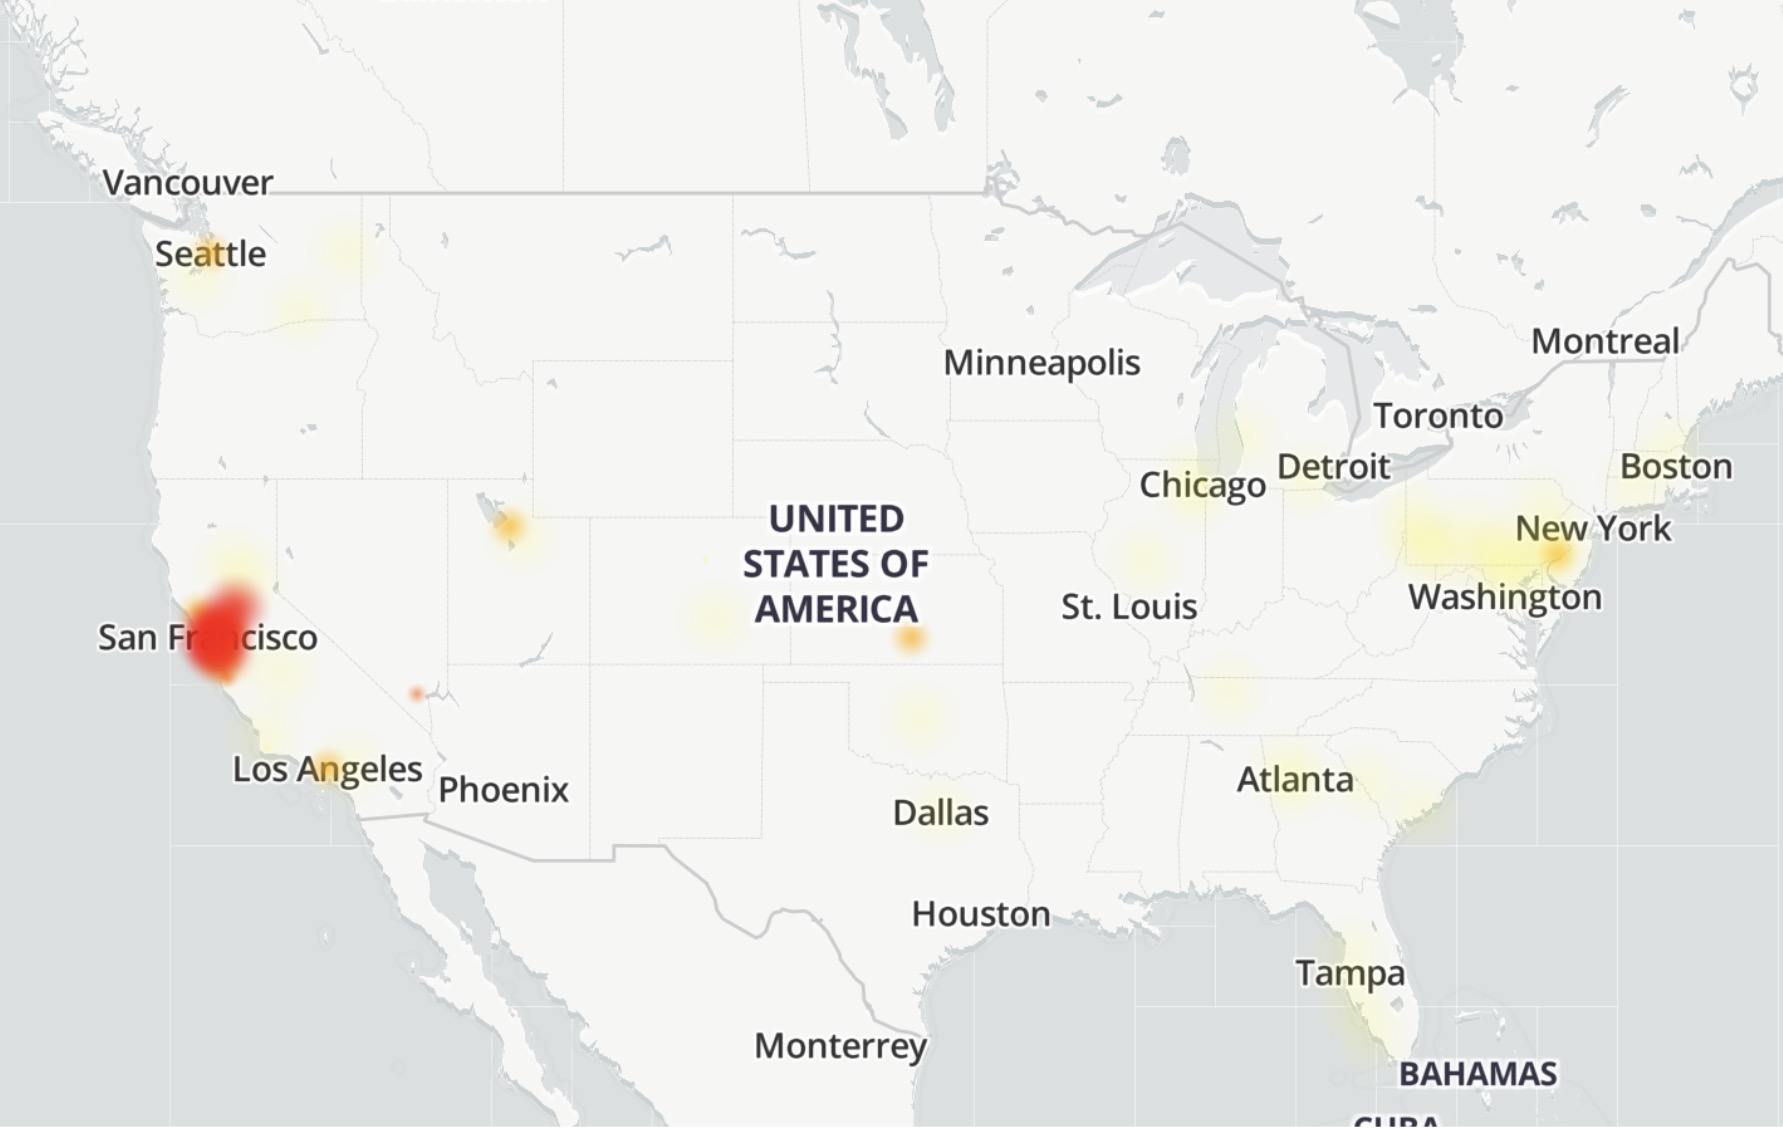 Downdetector's Comcast Heatmap shows where user-submitted problem reports are concentrated over the past 24 hours.